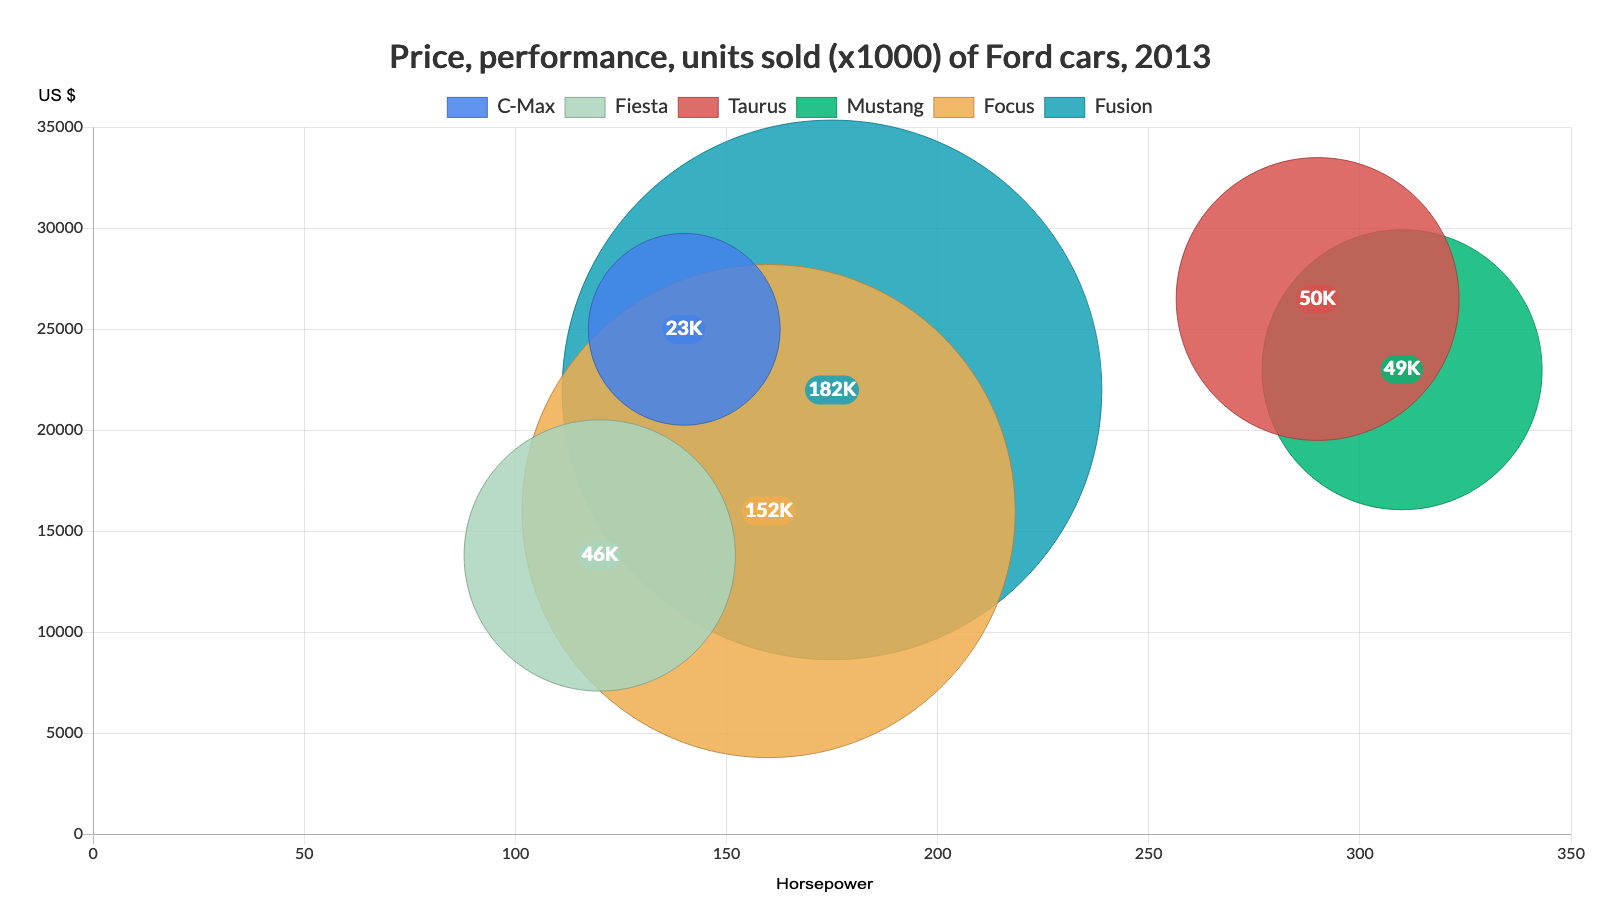 Bubble - Price, performance, units sold (x1000) of Ford cars